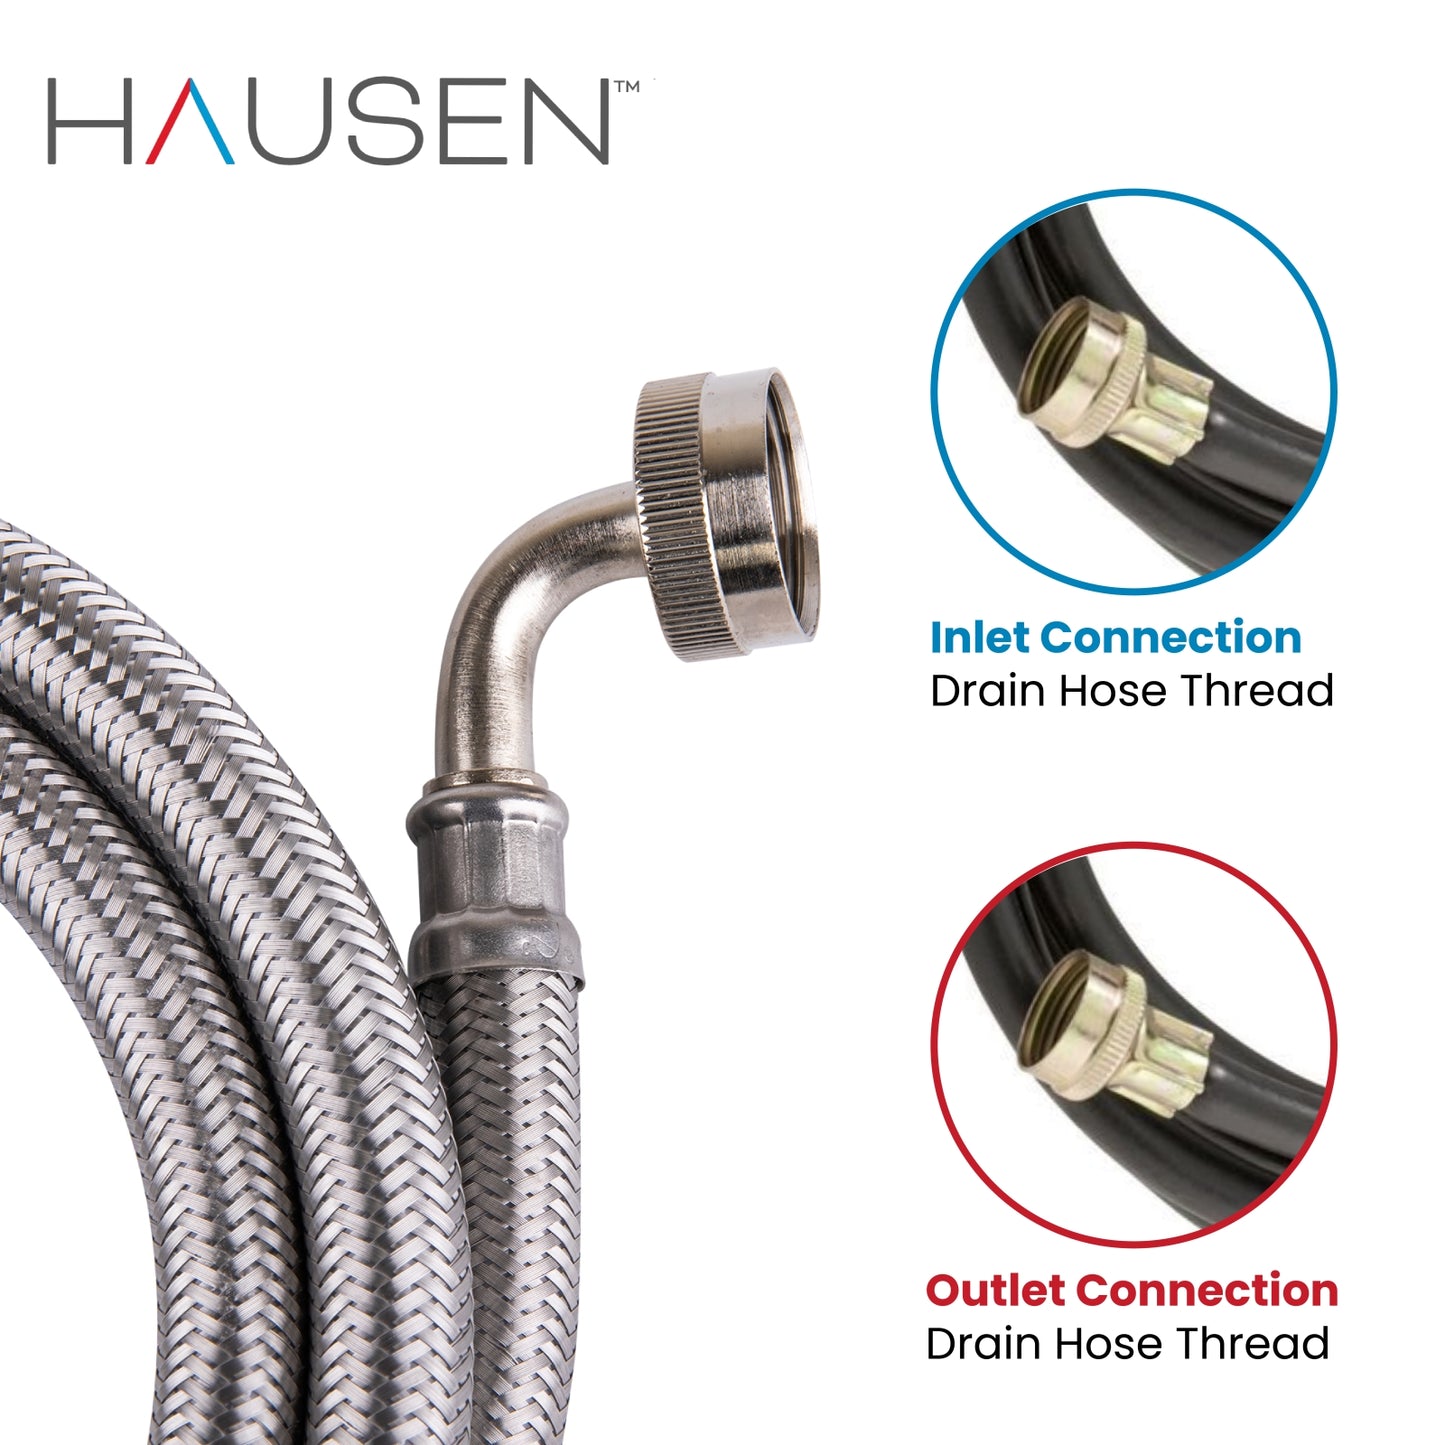 Hausen 3/4-inch FHT (Female Hose Thread) x 3/4-inch FHT (Female Hose Thread) x 72-inch (6-Feet) Length Stainless Steel Steam Dryer Kit with Elbow; Lead Free; Compatible with Most Steam Dryers, 1-Pack